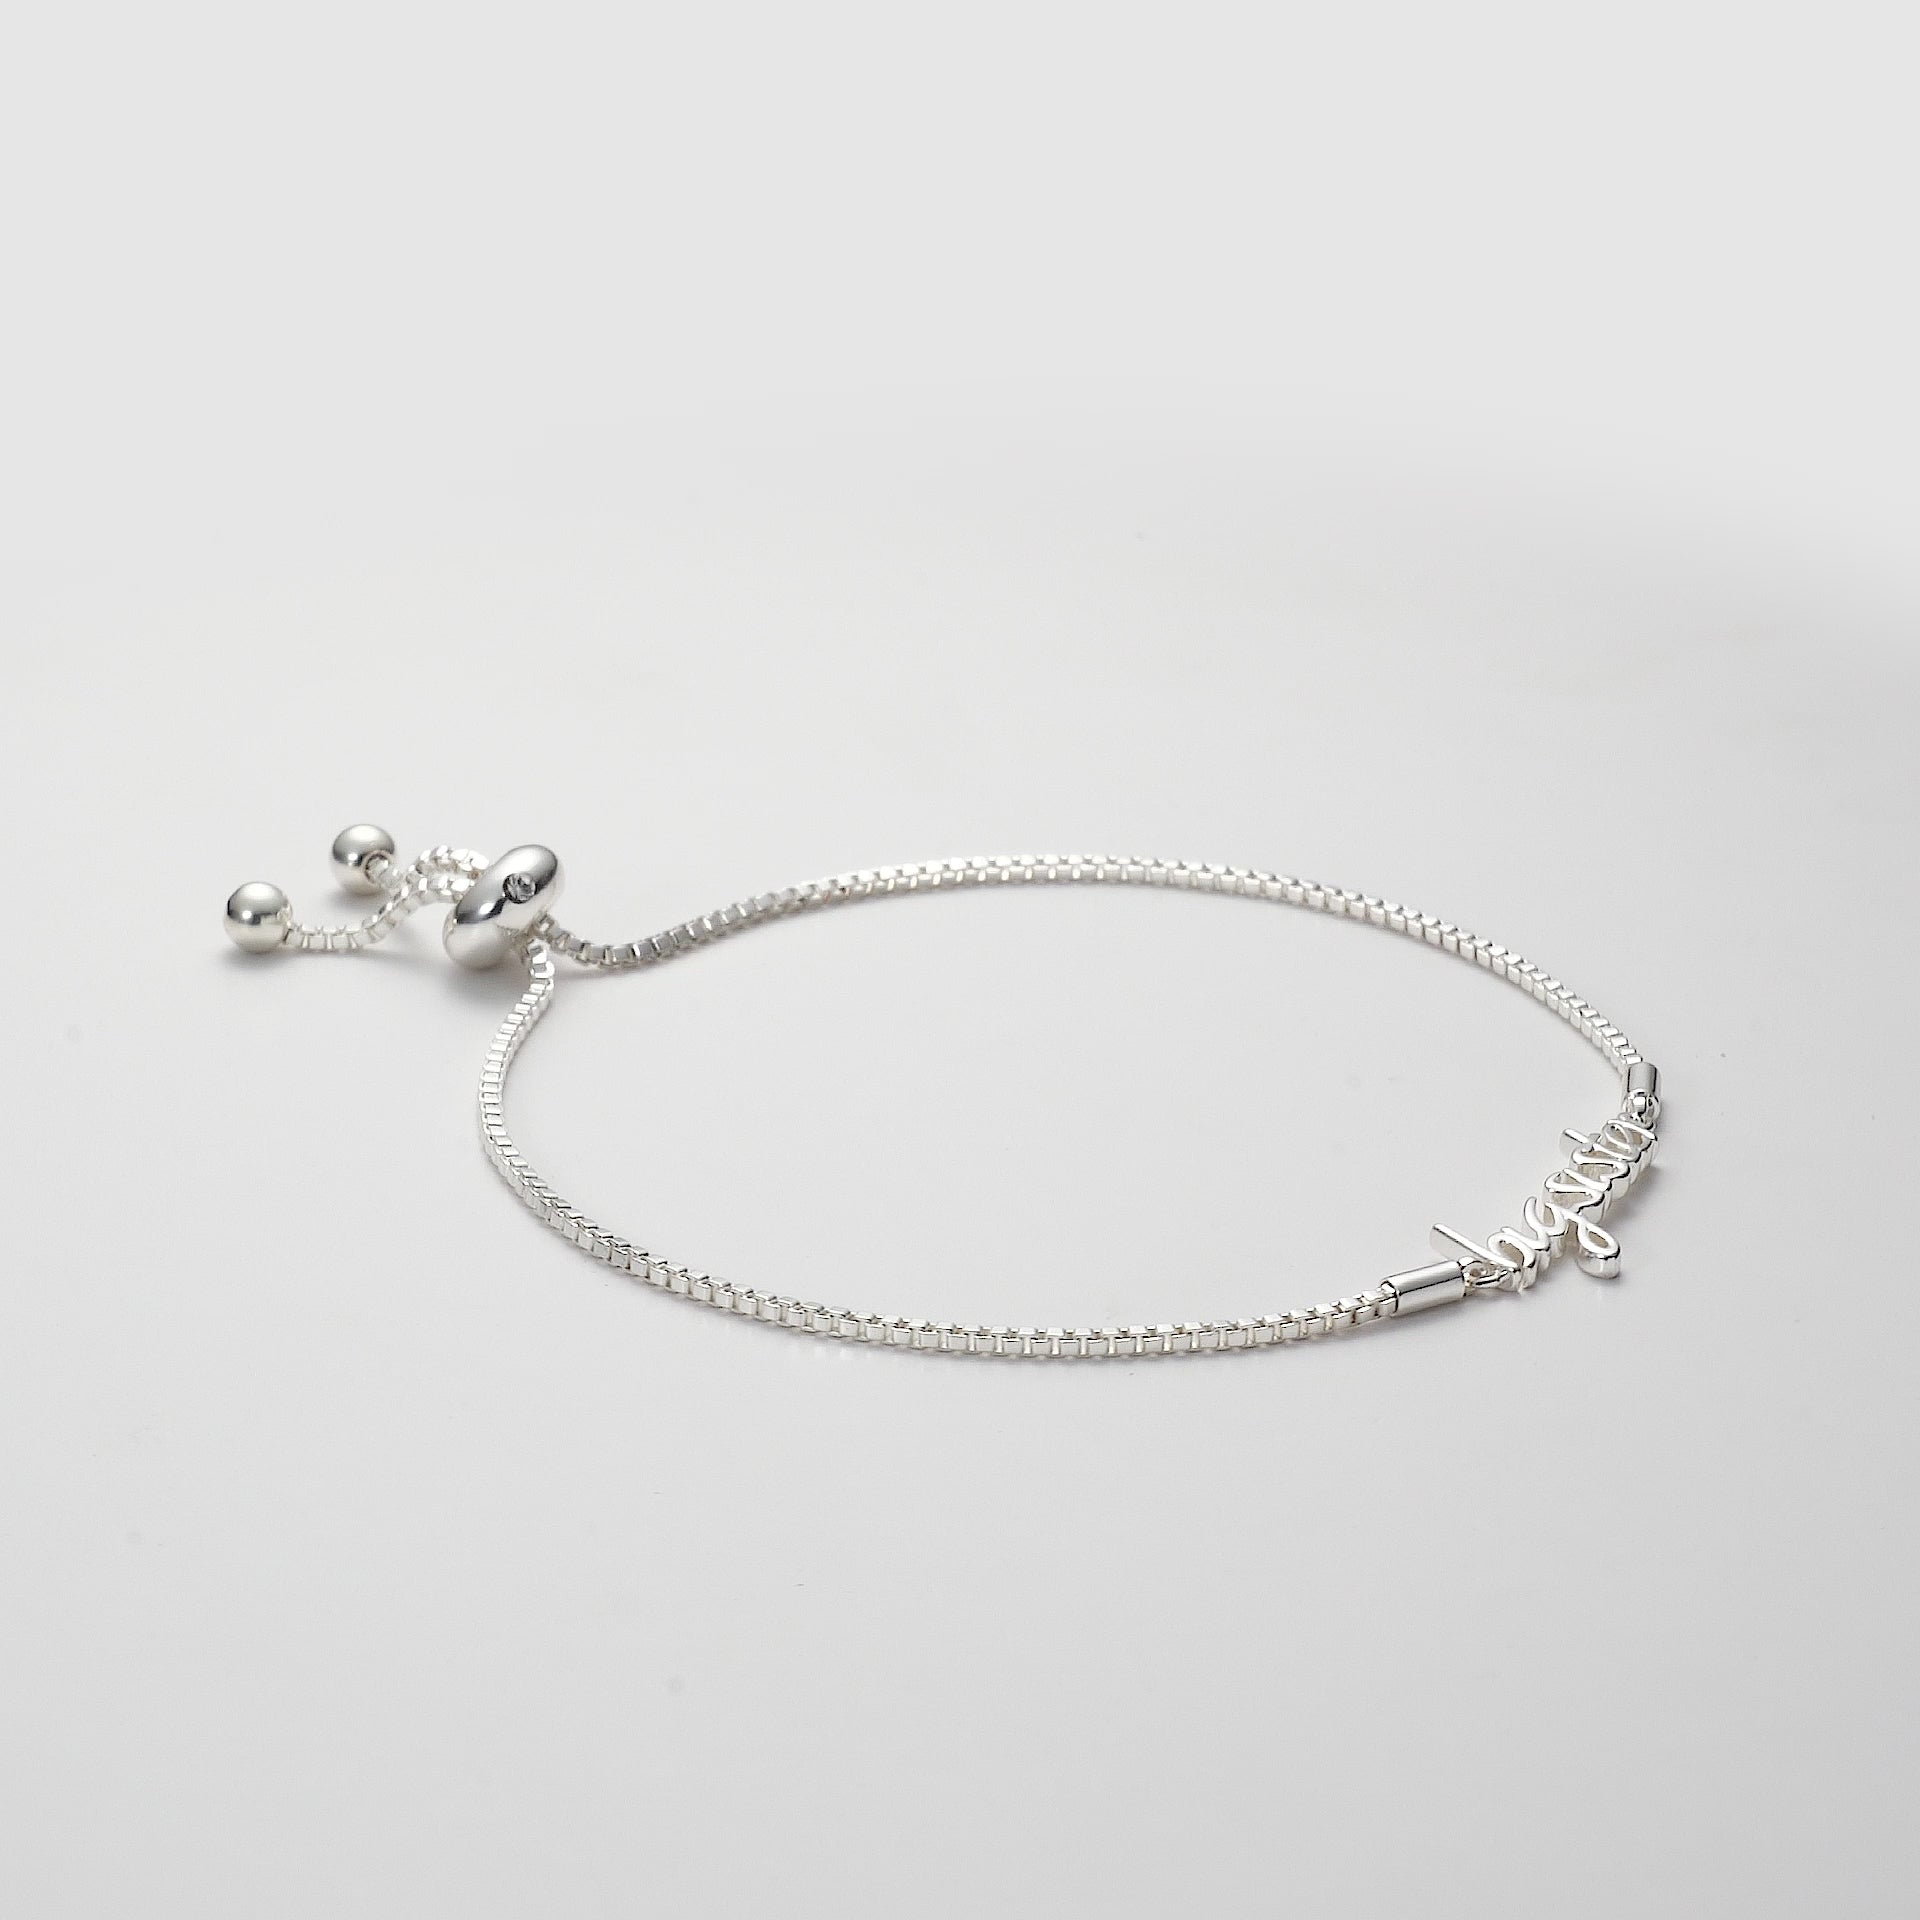 Silver Plated Big Sister Bracelet Created with Zircondia® Crystals